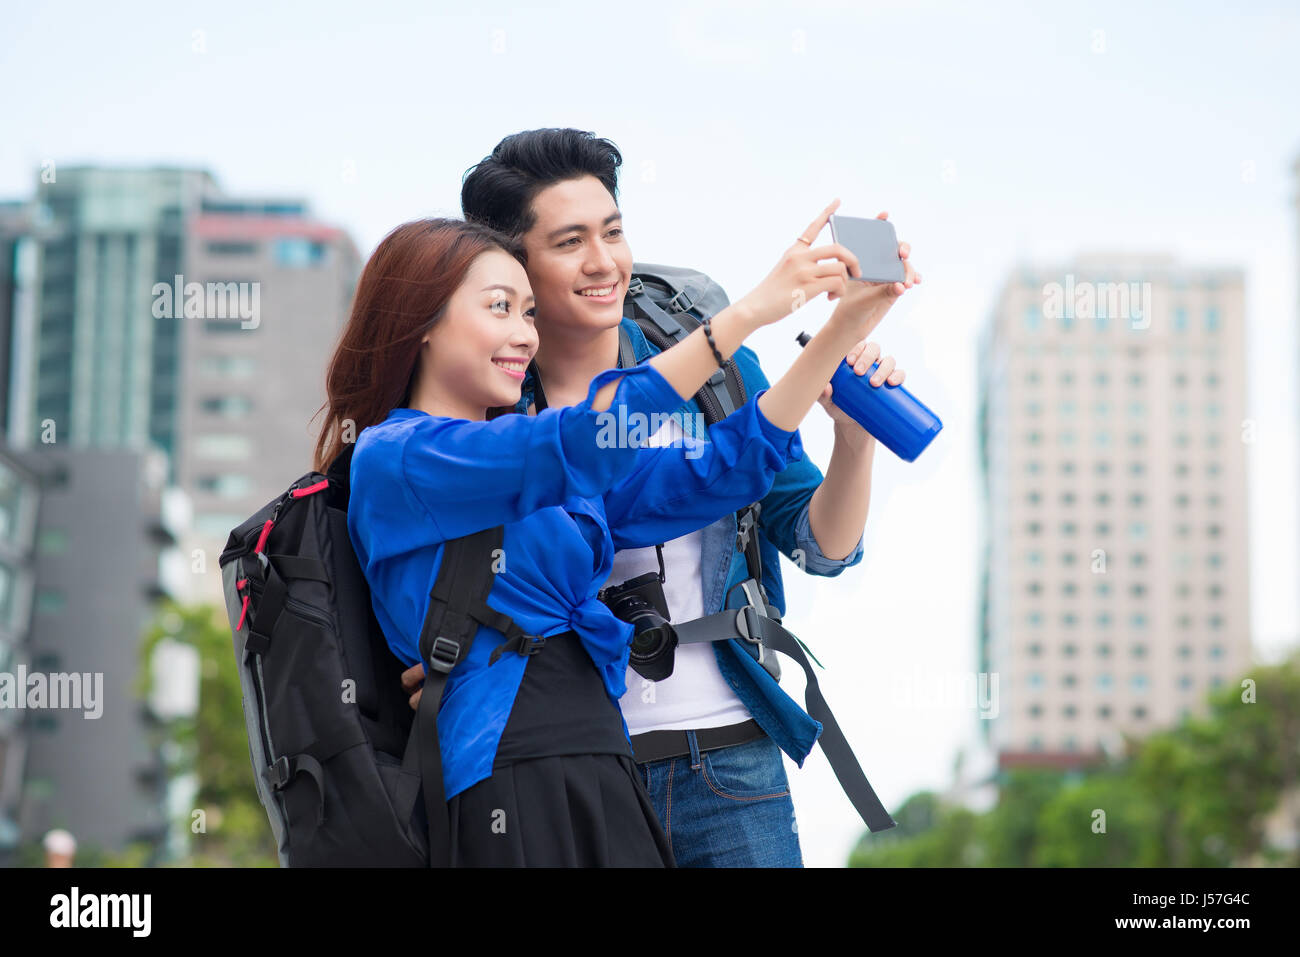 Happy tourists taking photo of themselves. summer holidays, travel, vacation, tourism and dating concept - couple taking photo picture with camera Stock Photo